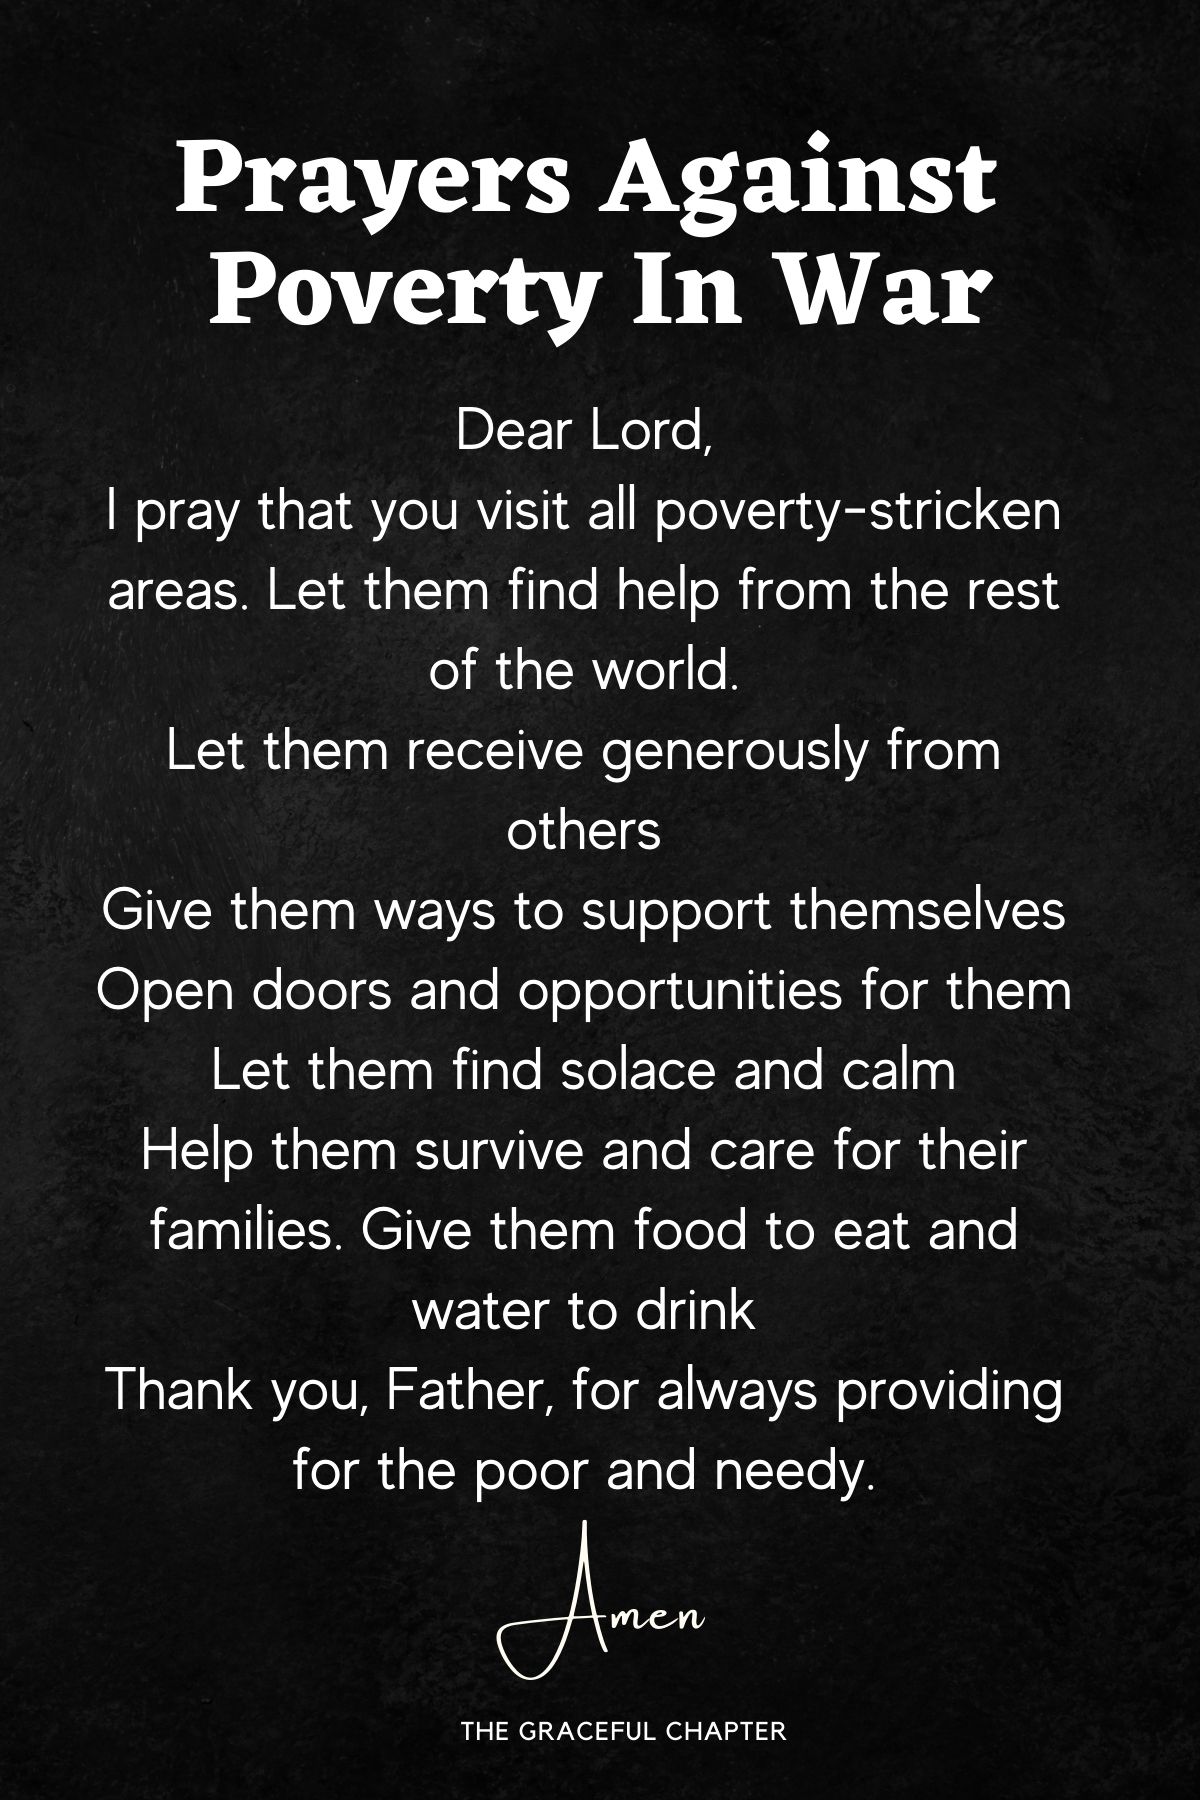 Prayers against poverty in war